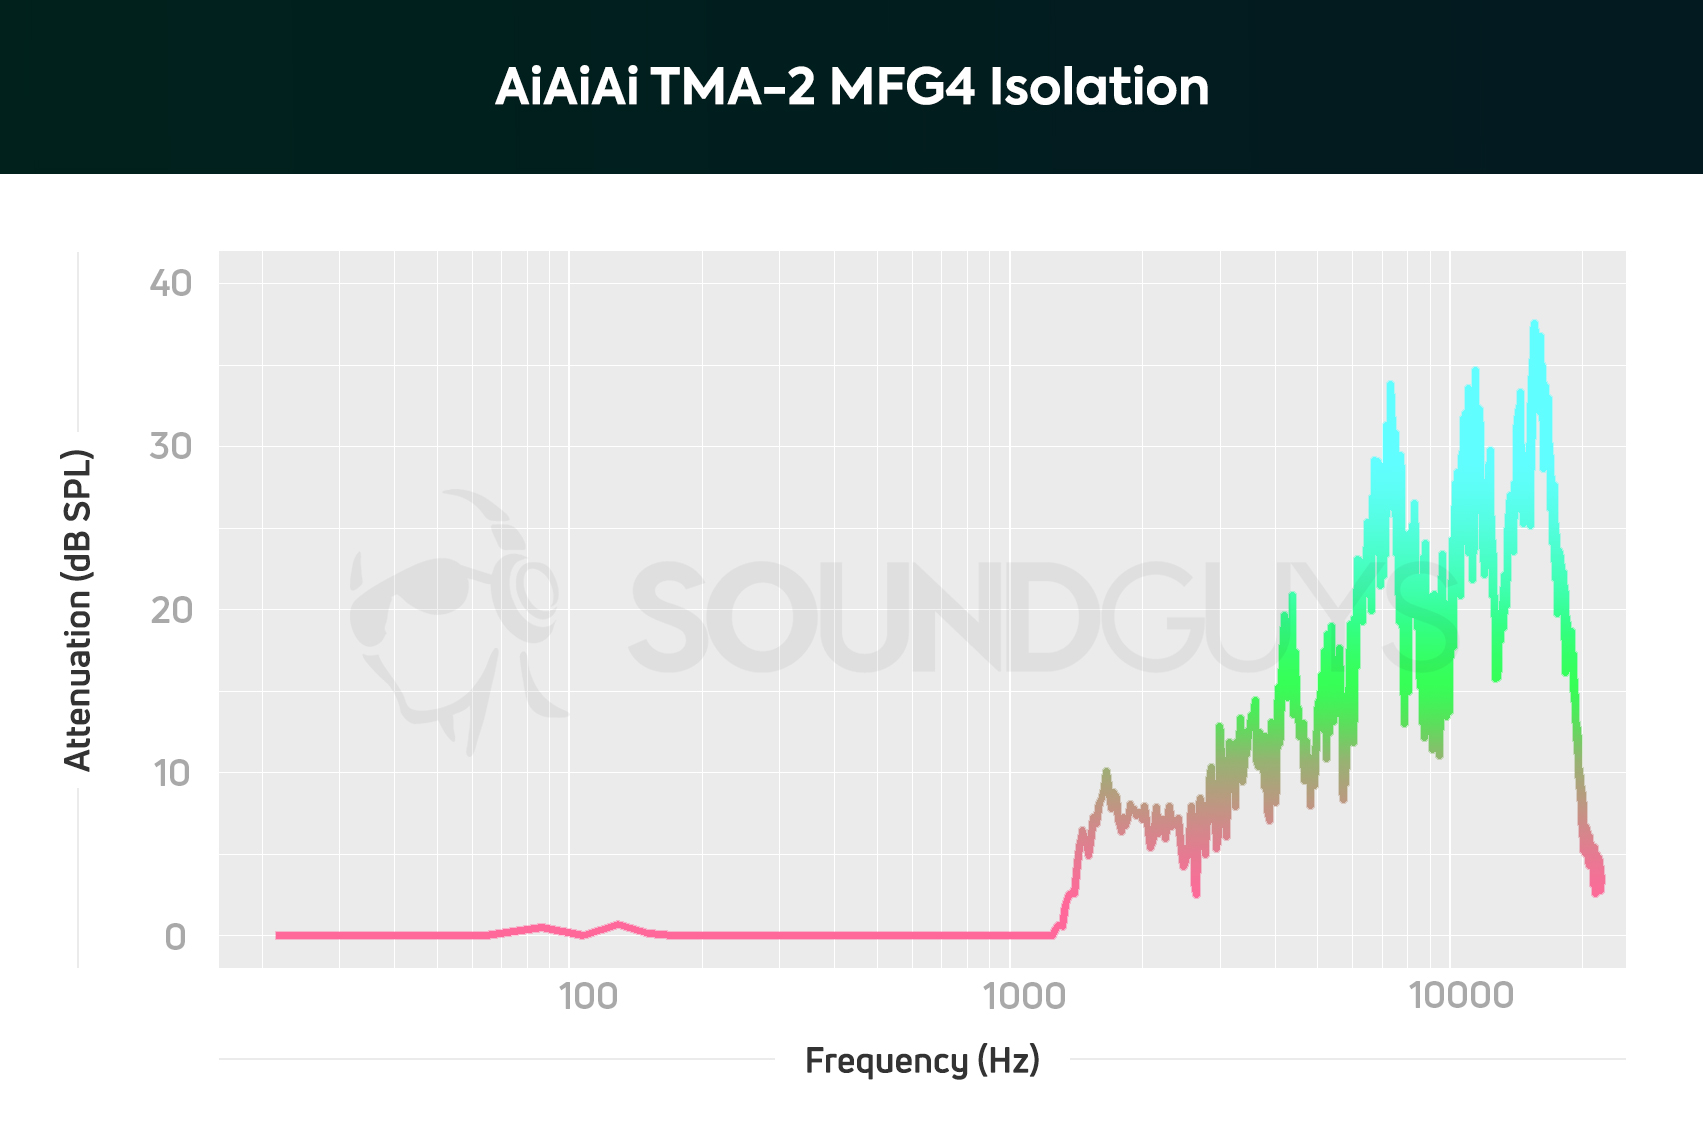 A chart showing the isolation performance of the AiAiAi TMA-2 MFG4